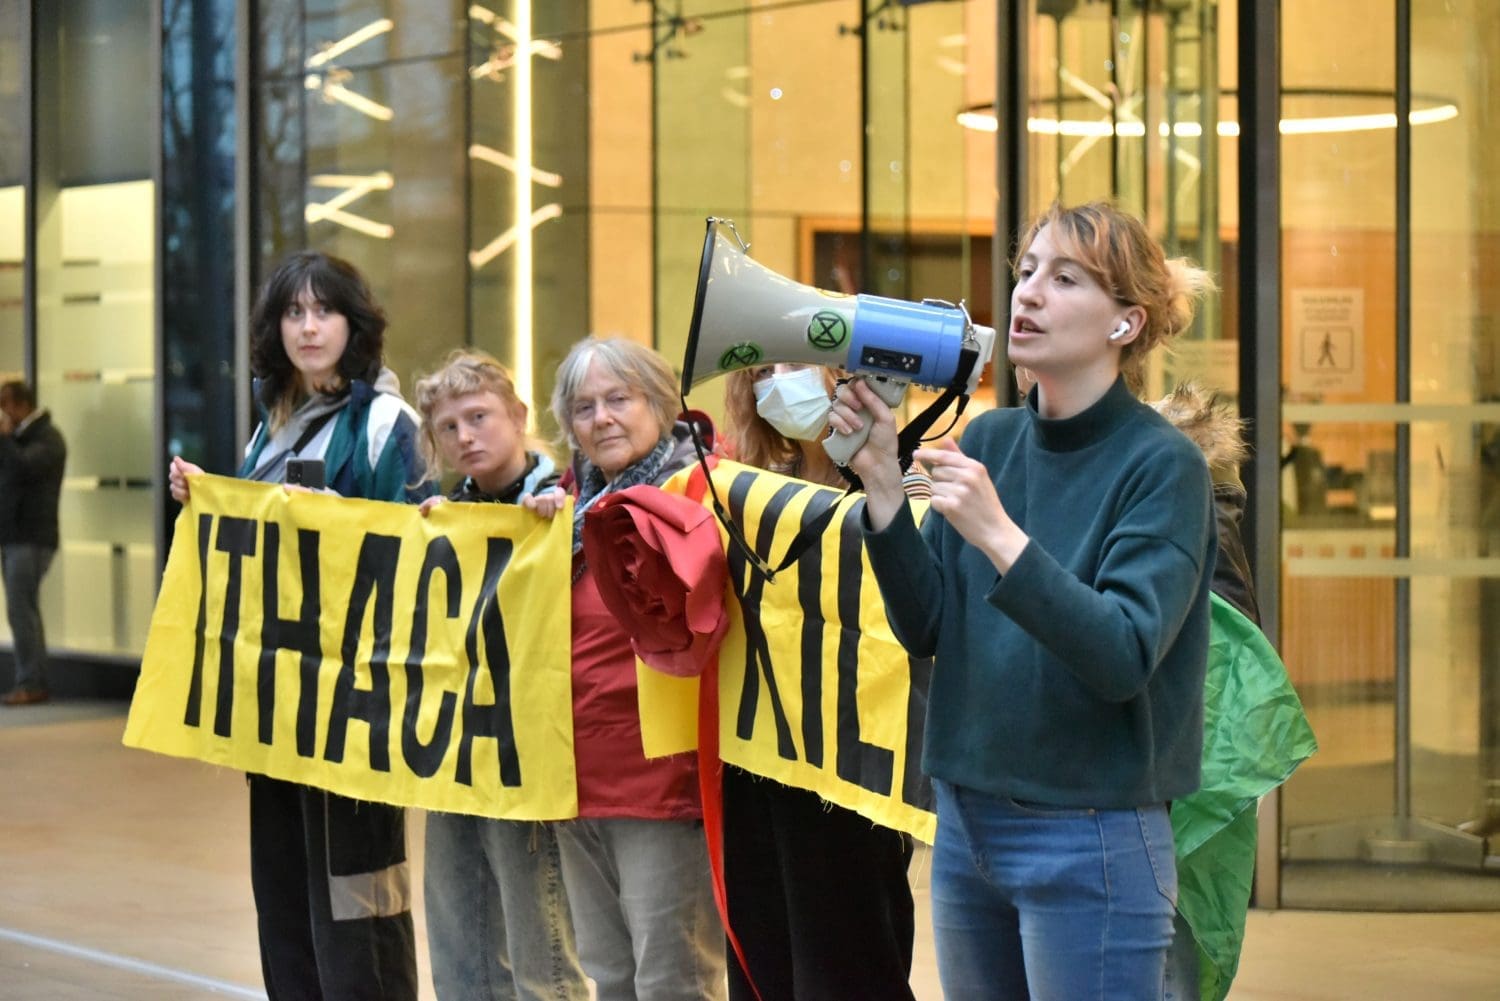 Fossil Free London activists stand in a line in front of Equinor's entrance at Paddington. One holds a megaphone, while the rest raise a banner which reads "Ithaca Kills".